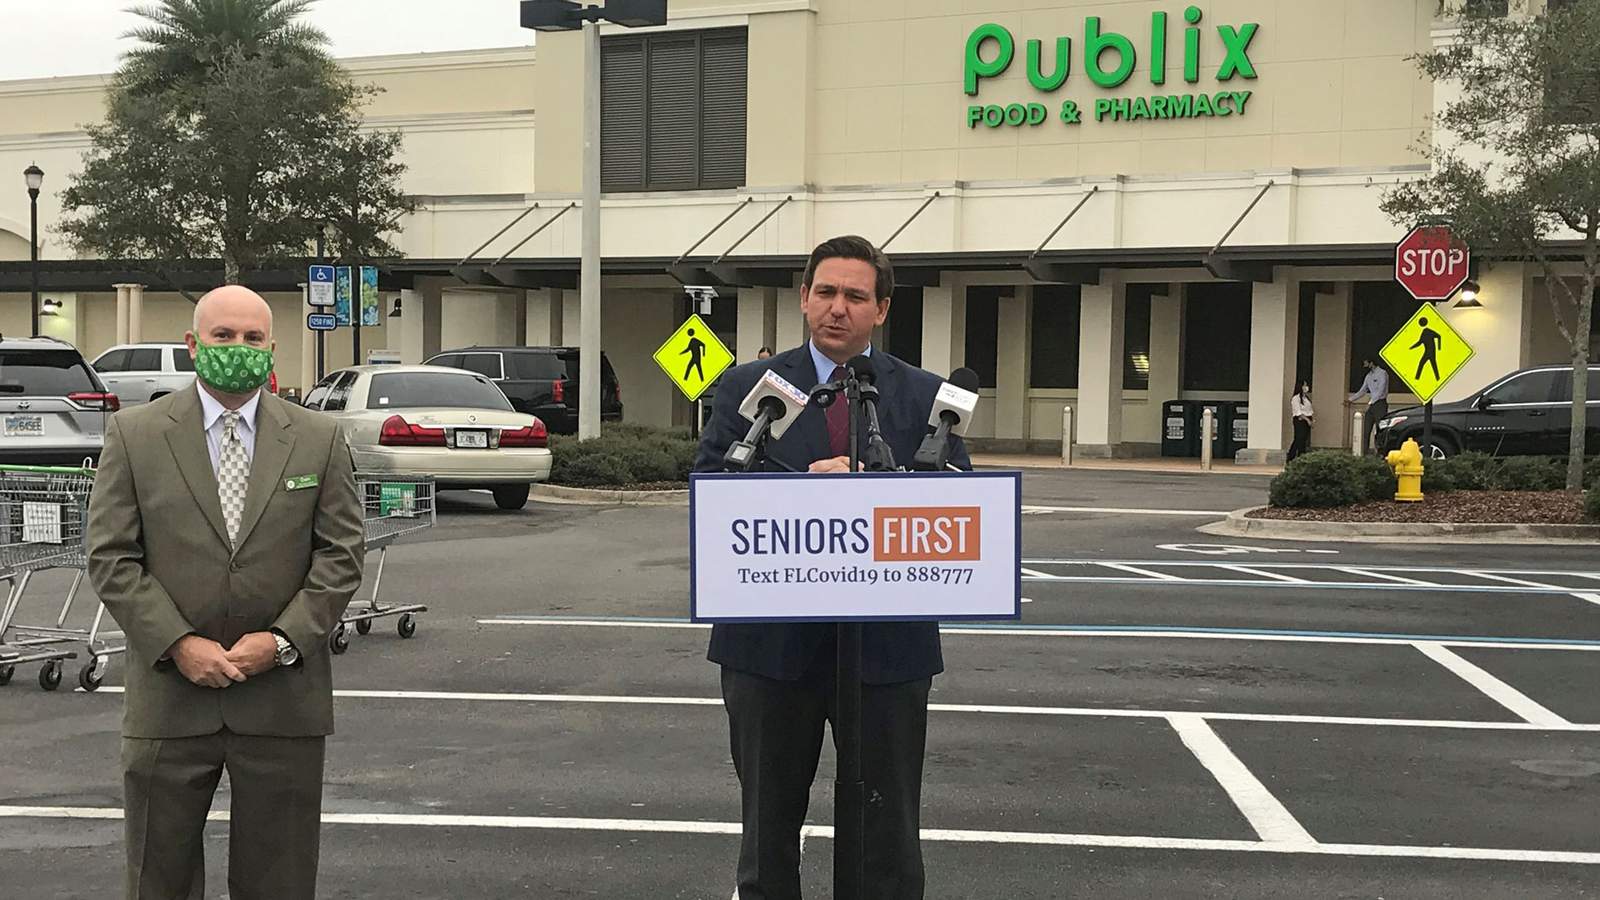 Vaccination program at Publix expanding into Brevard County, governor says